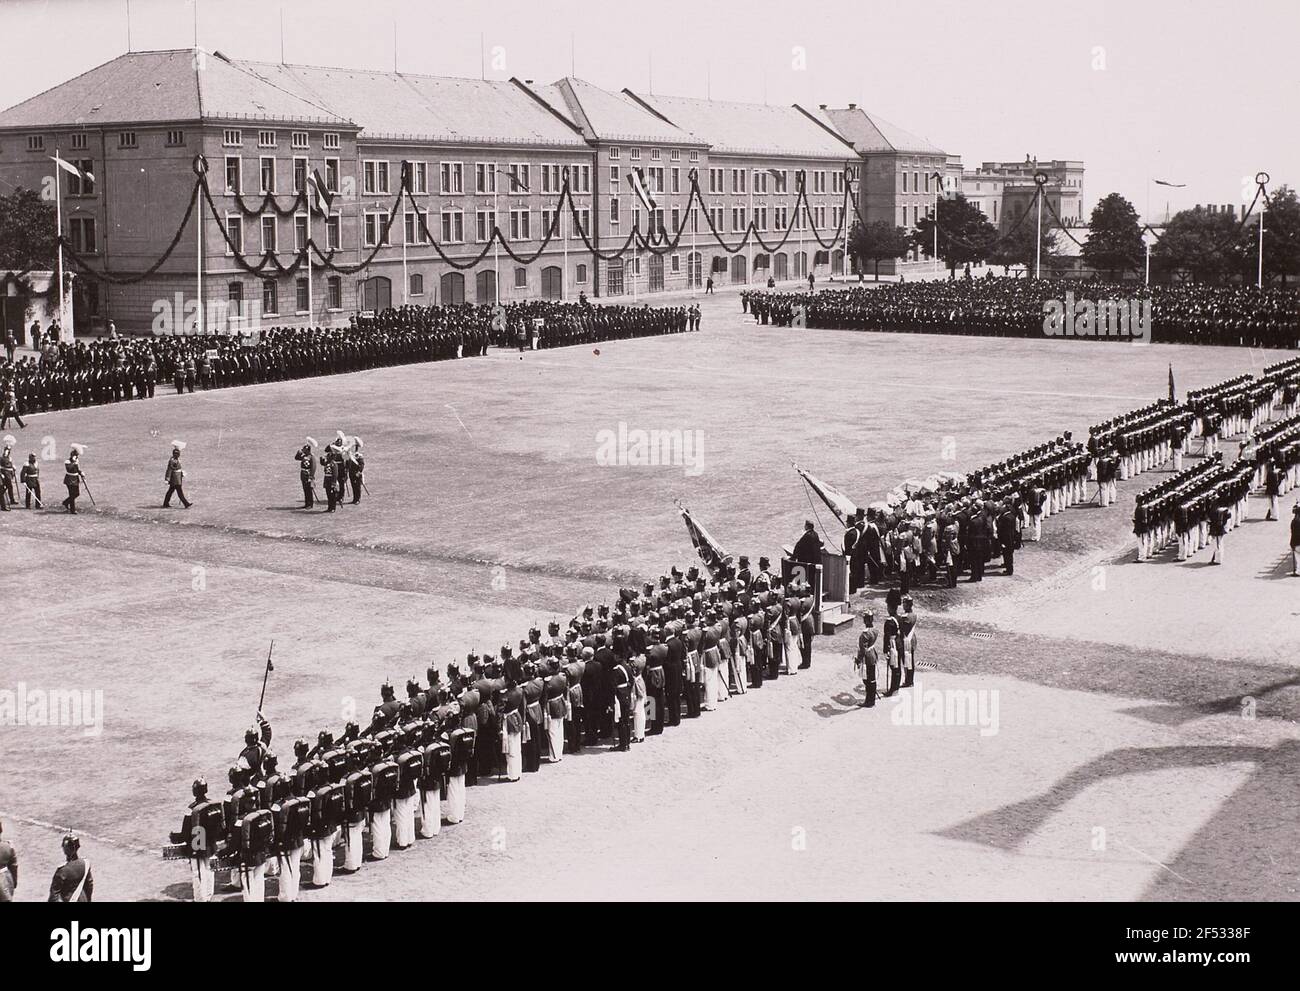 Friedrich August III., King of Saxony, and Grand Duke Friedrich II of Baden visiting the Infantry Regiment No. 103 of the Royal Saxon Army in King-Albert barracks in Bautzen on 17.10.1908 Stock Photo